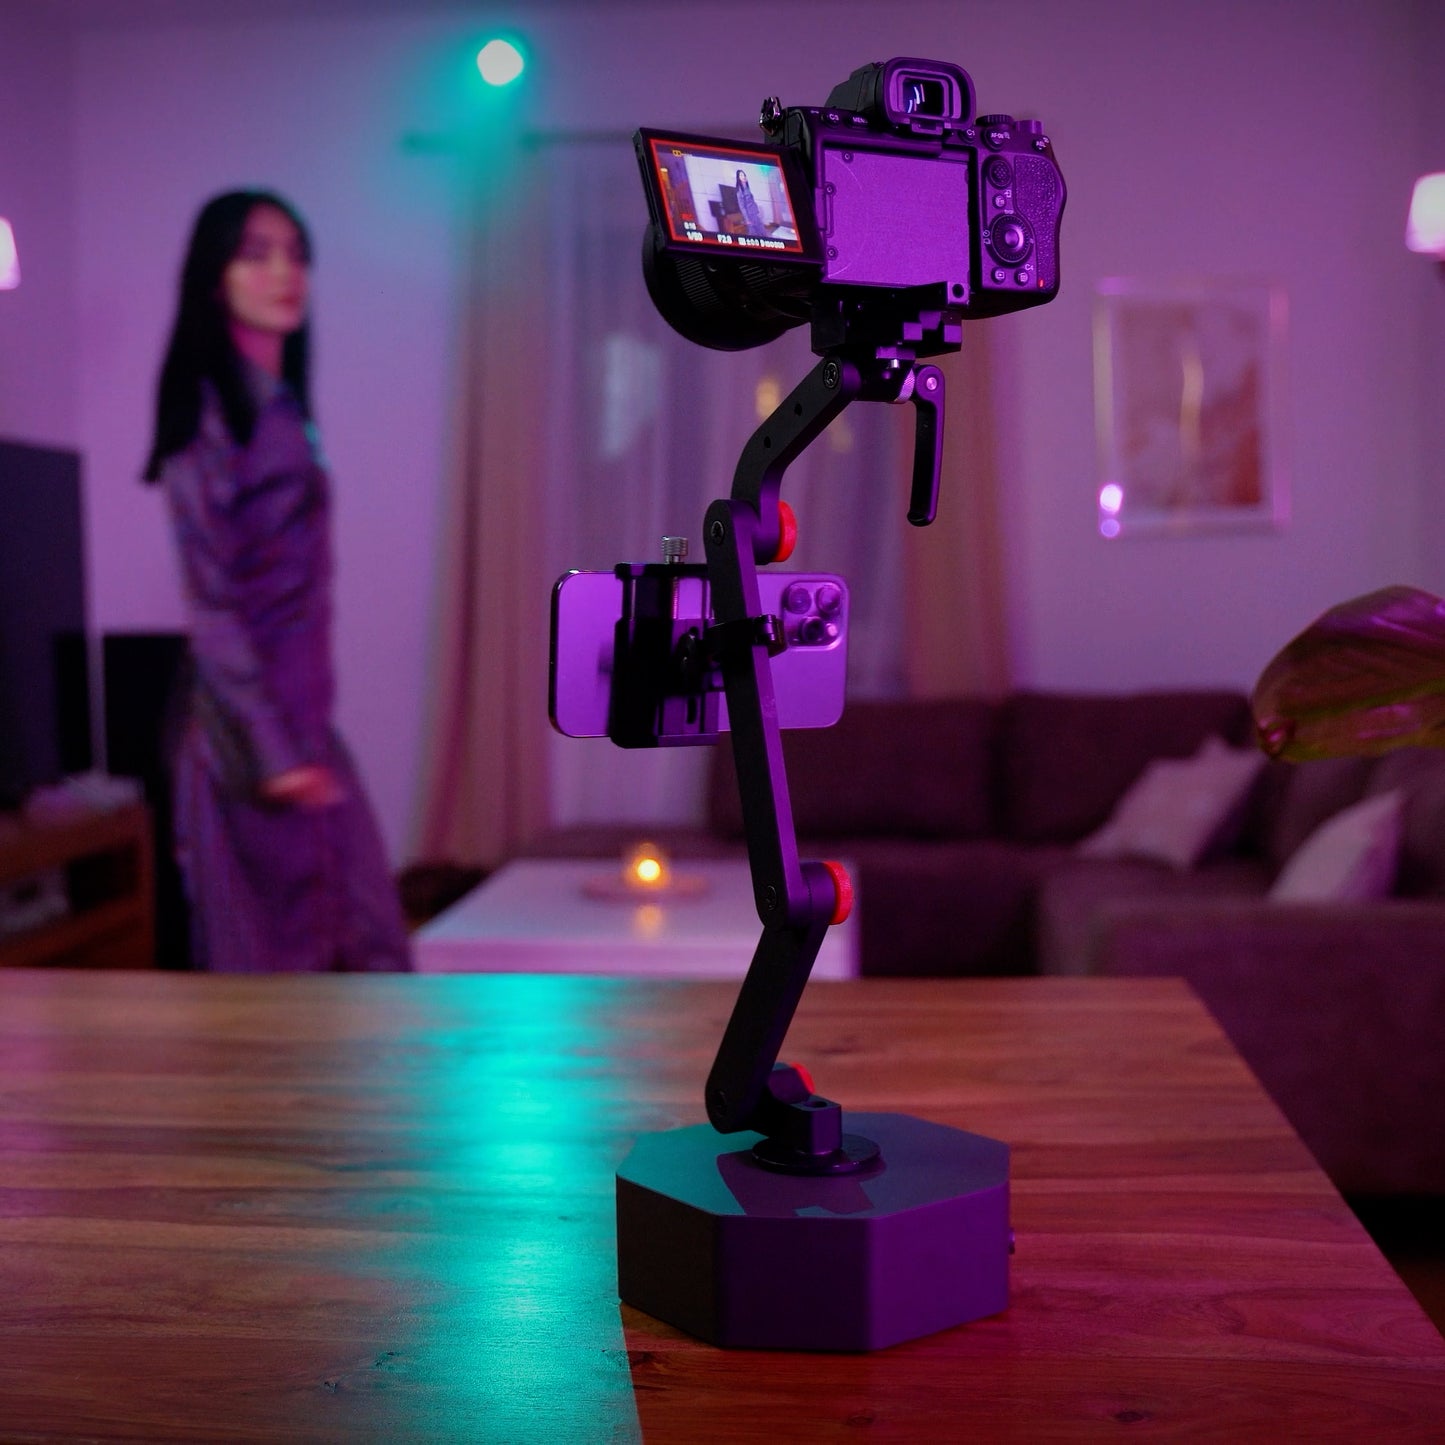 SEE Billy Pro - Your own AI Powered Camera Robot